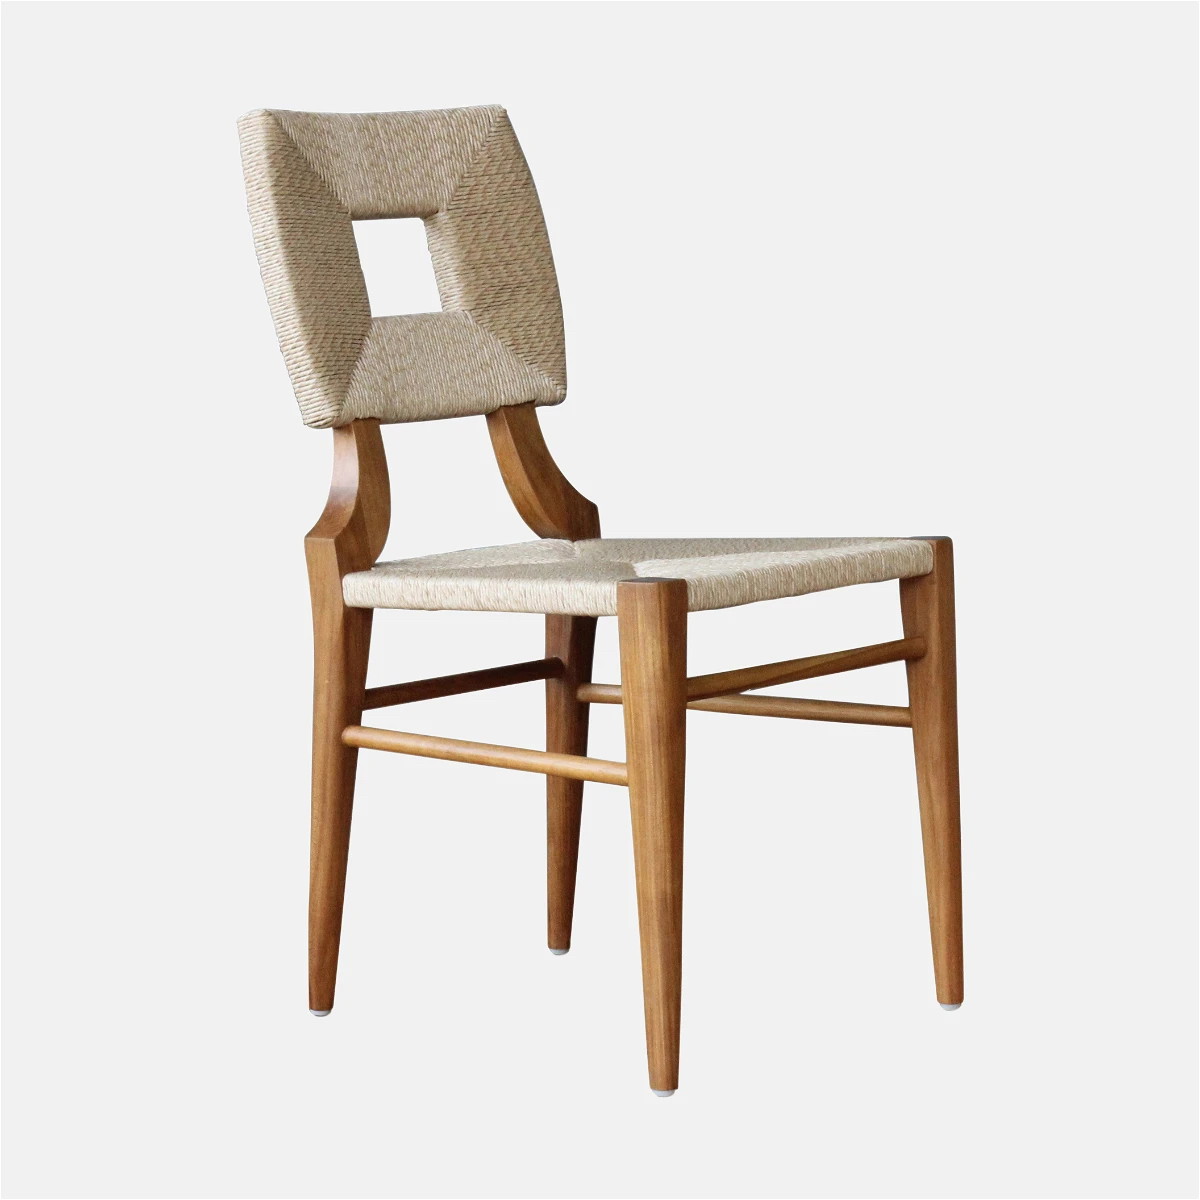 a wooden chair with a beige upholstered seat